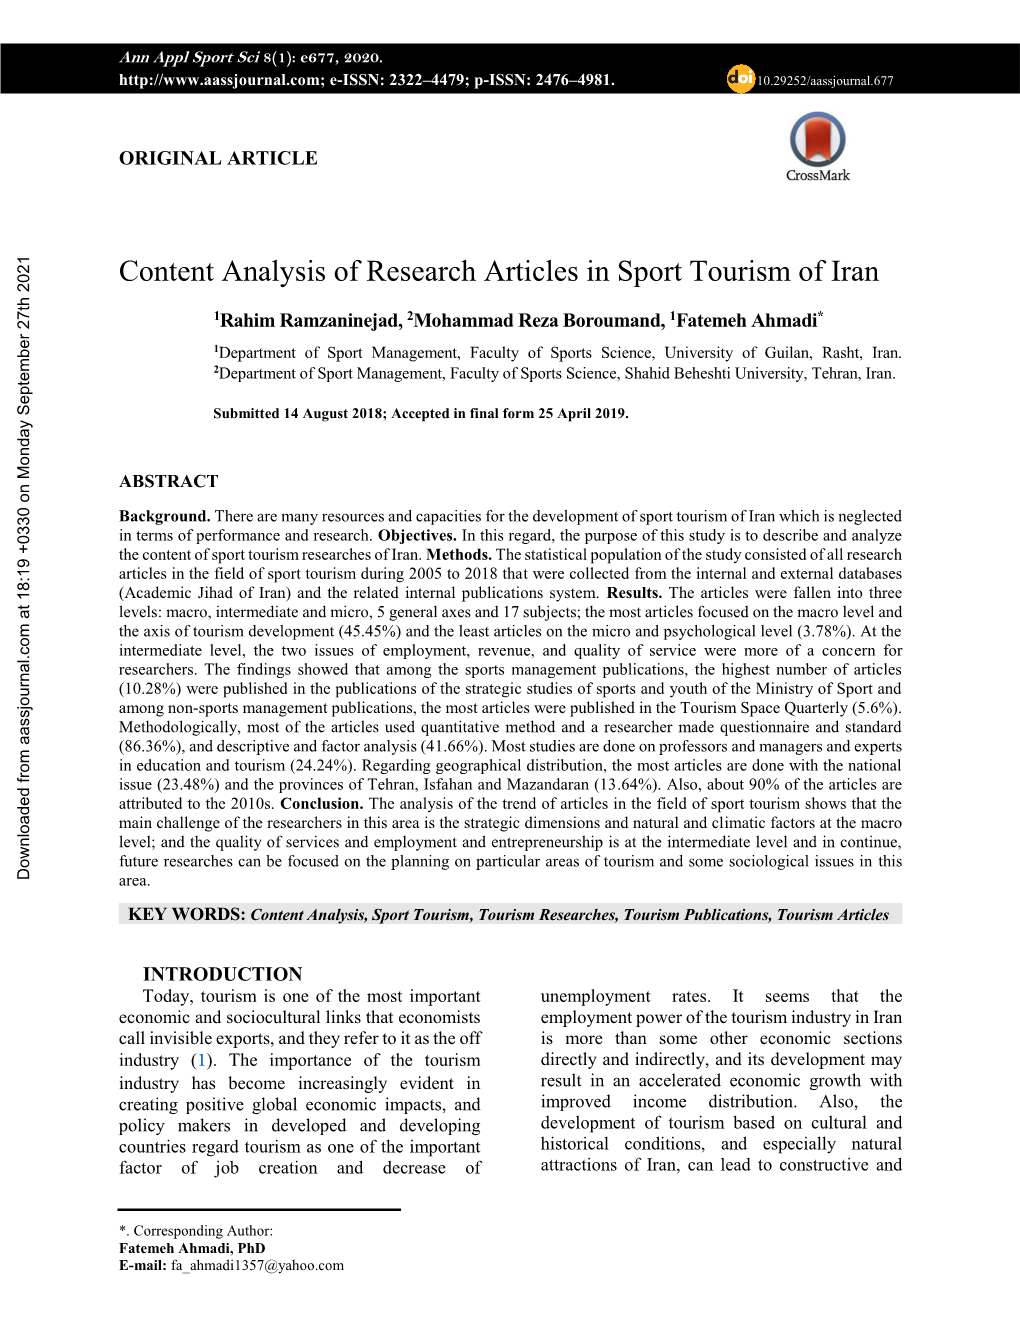 Content Analysis of Research Articles in Sport Tourism of Iran